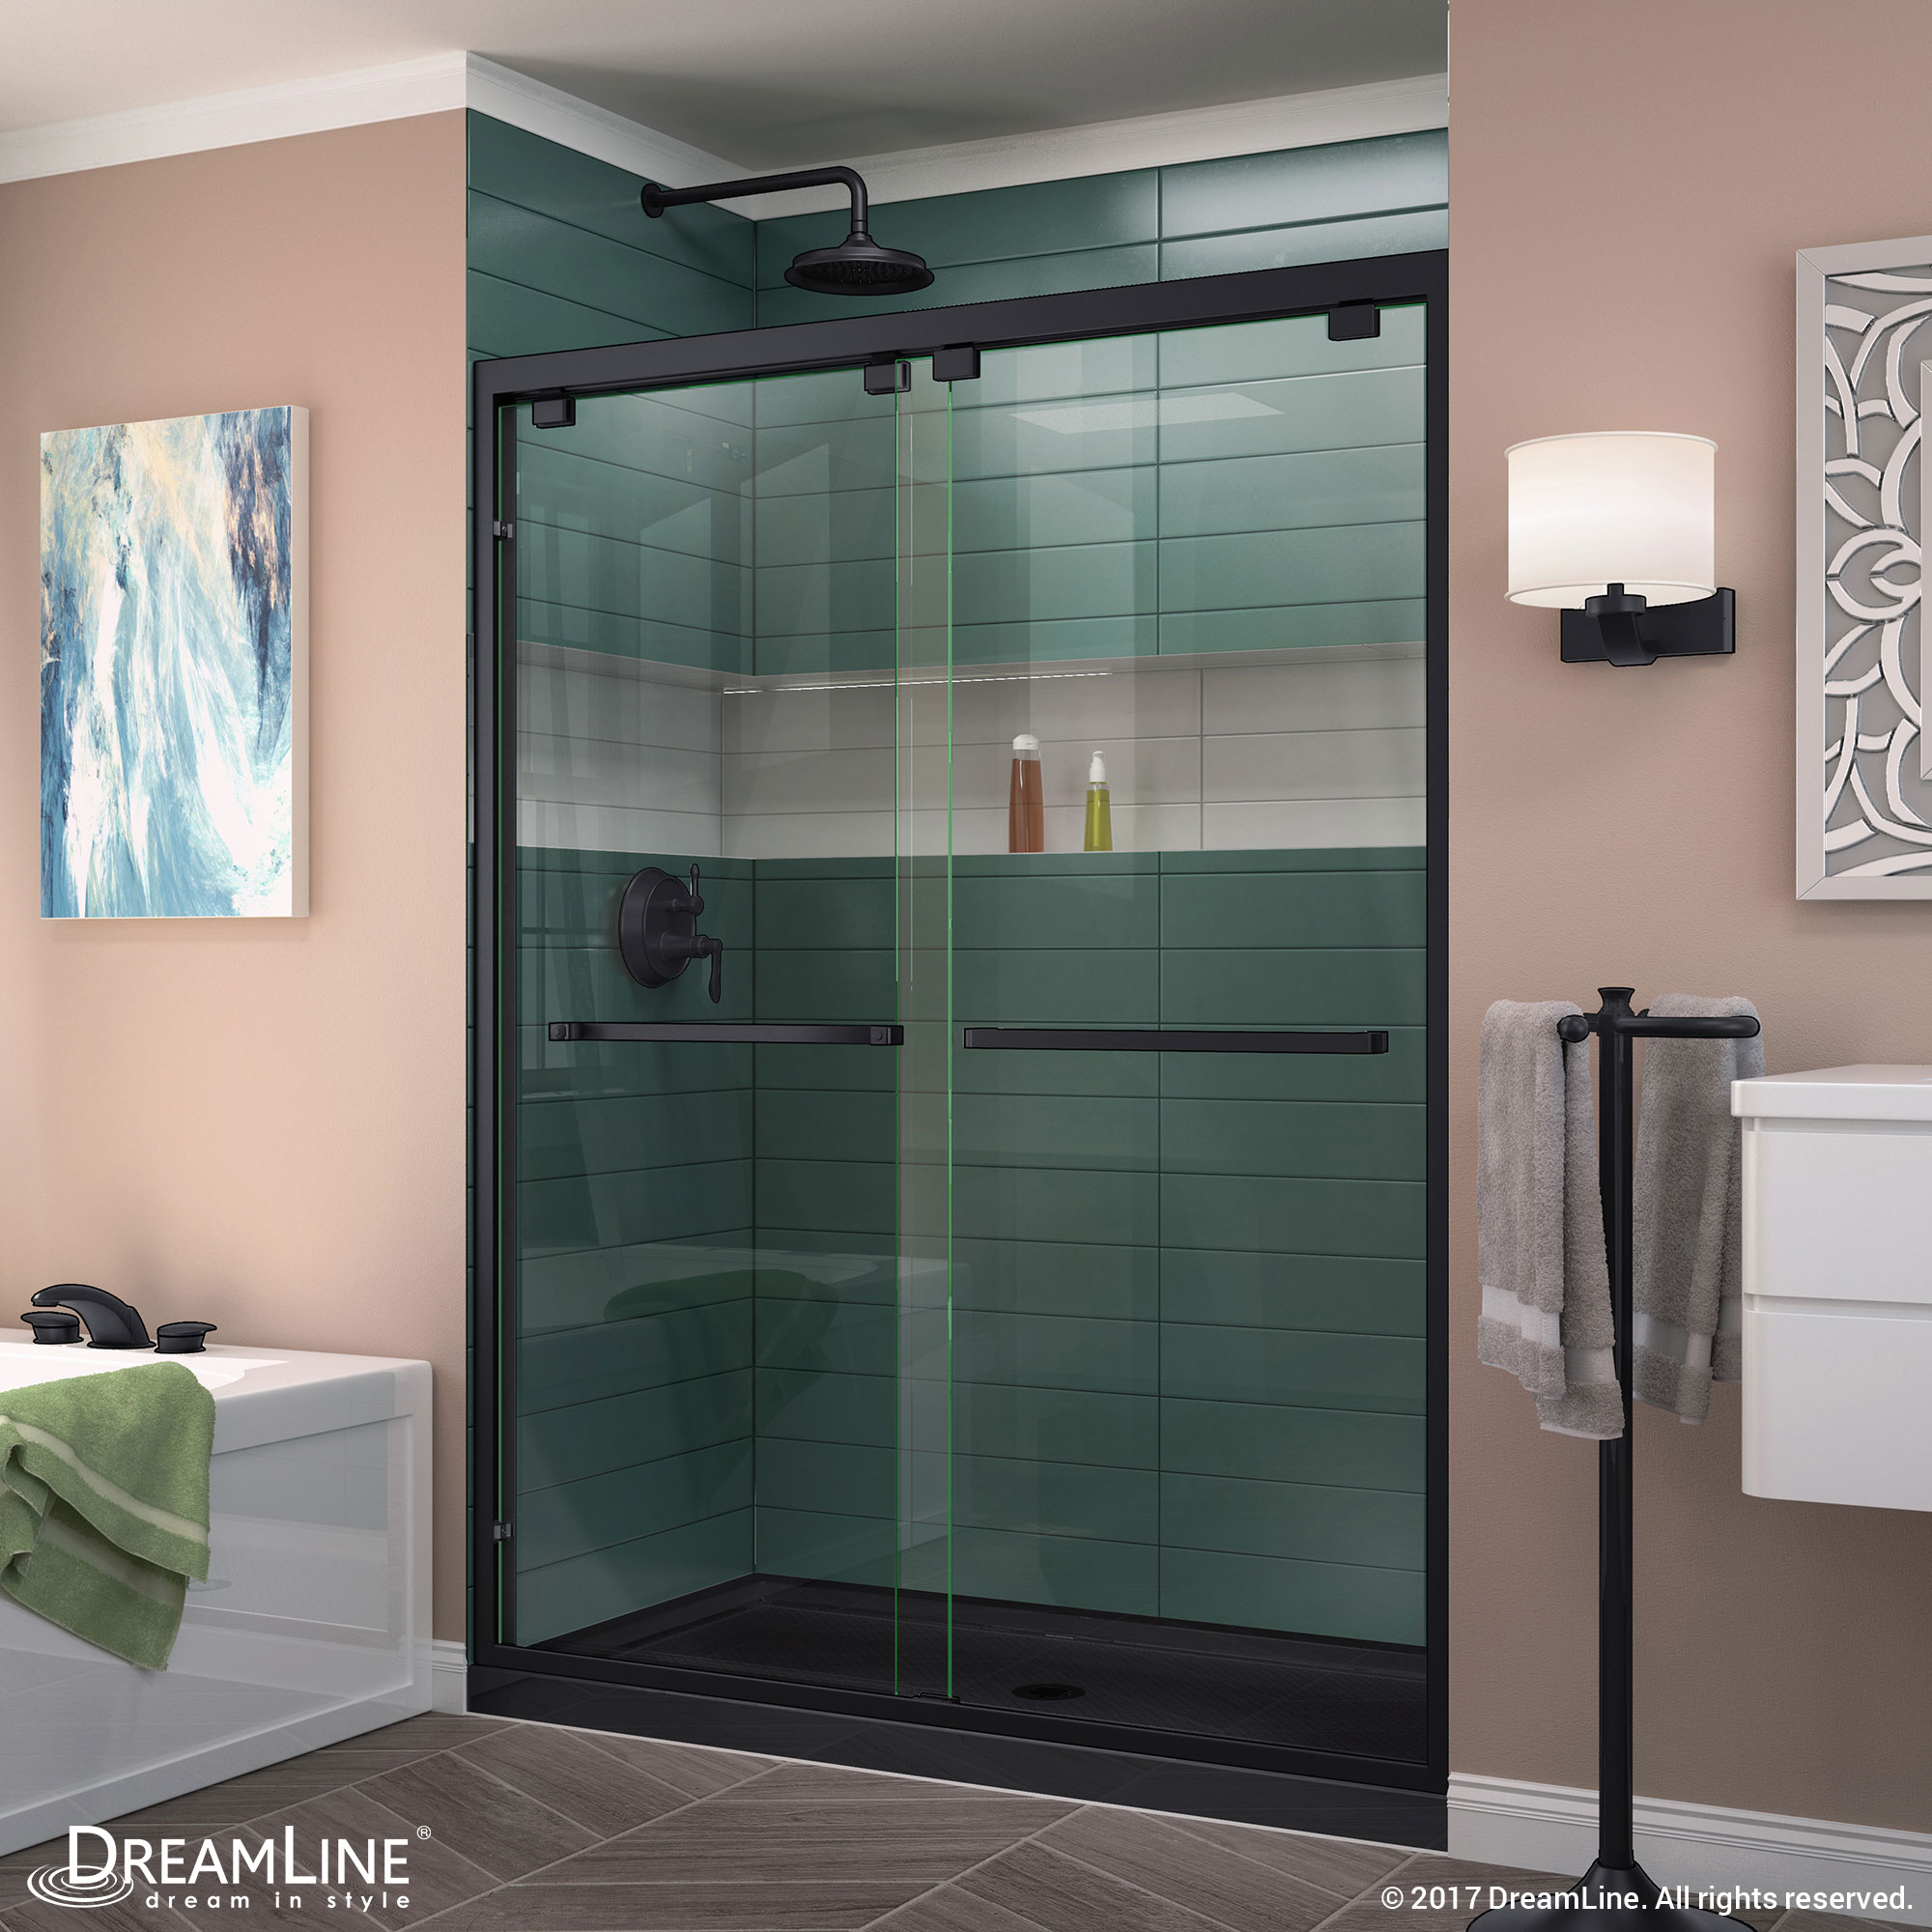 DreamLine Encore 34 in. D x 60 in. W x 78 3/4 in. H Bypass Shower Door in Chrome and Center Drain Black Base Kit